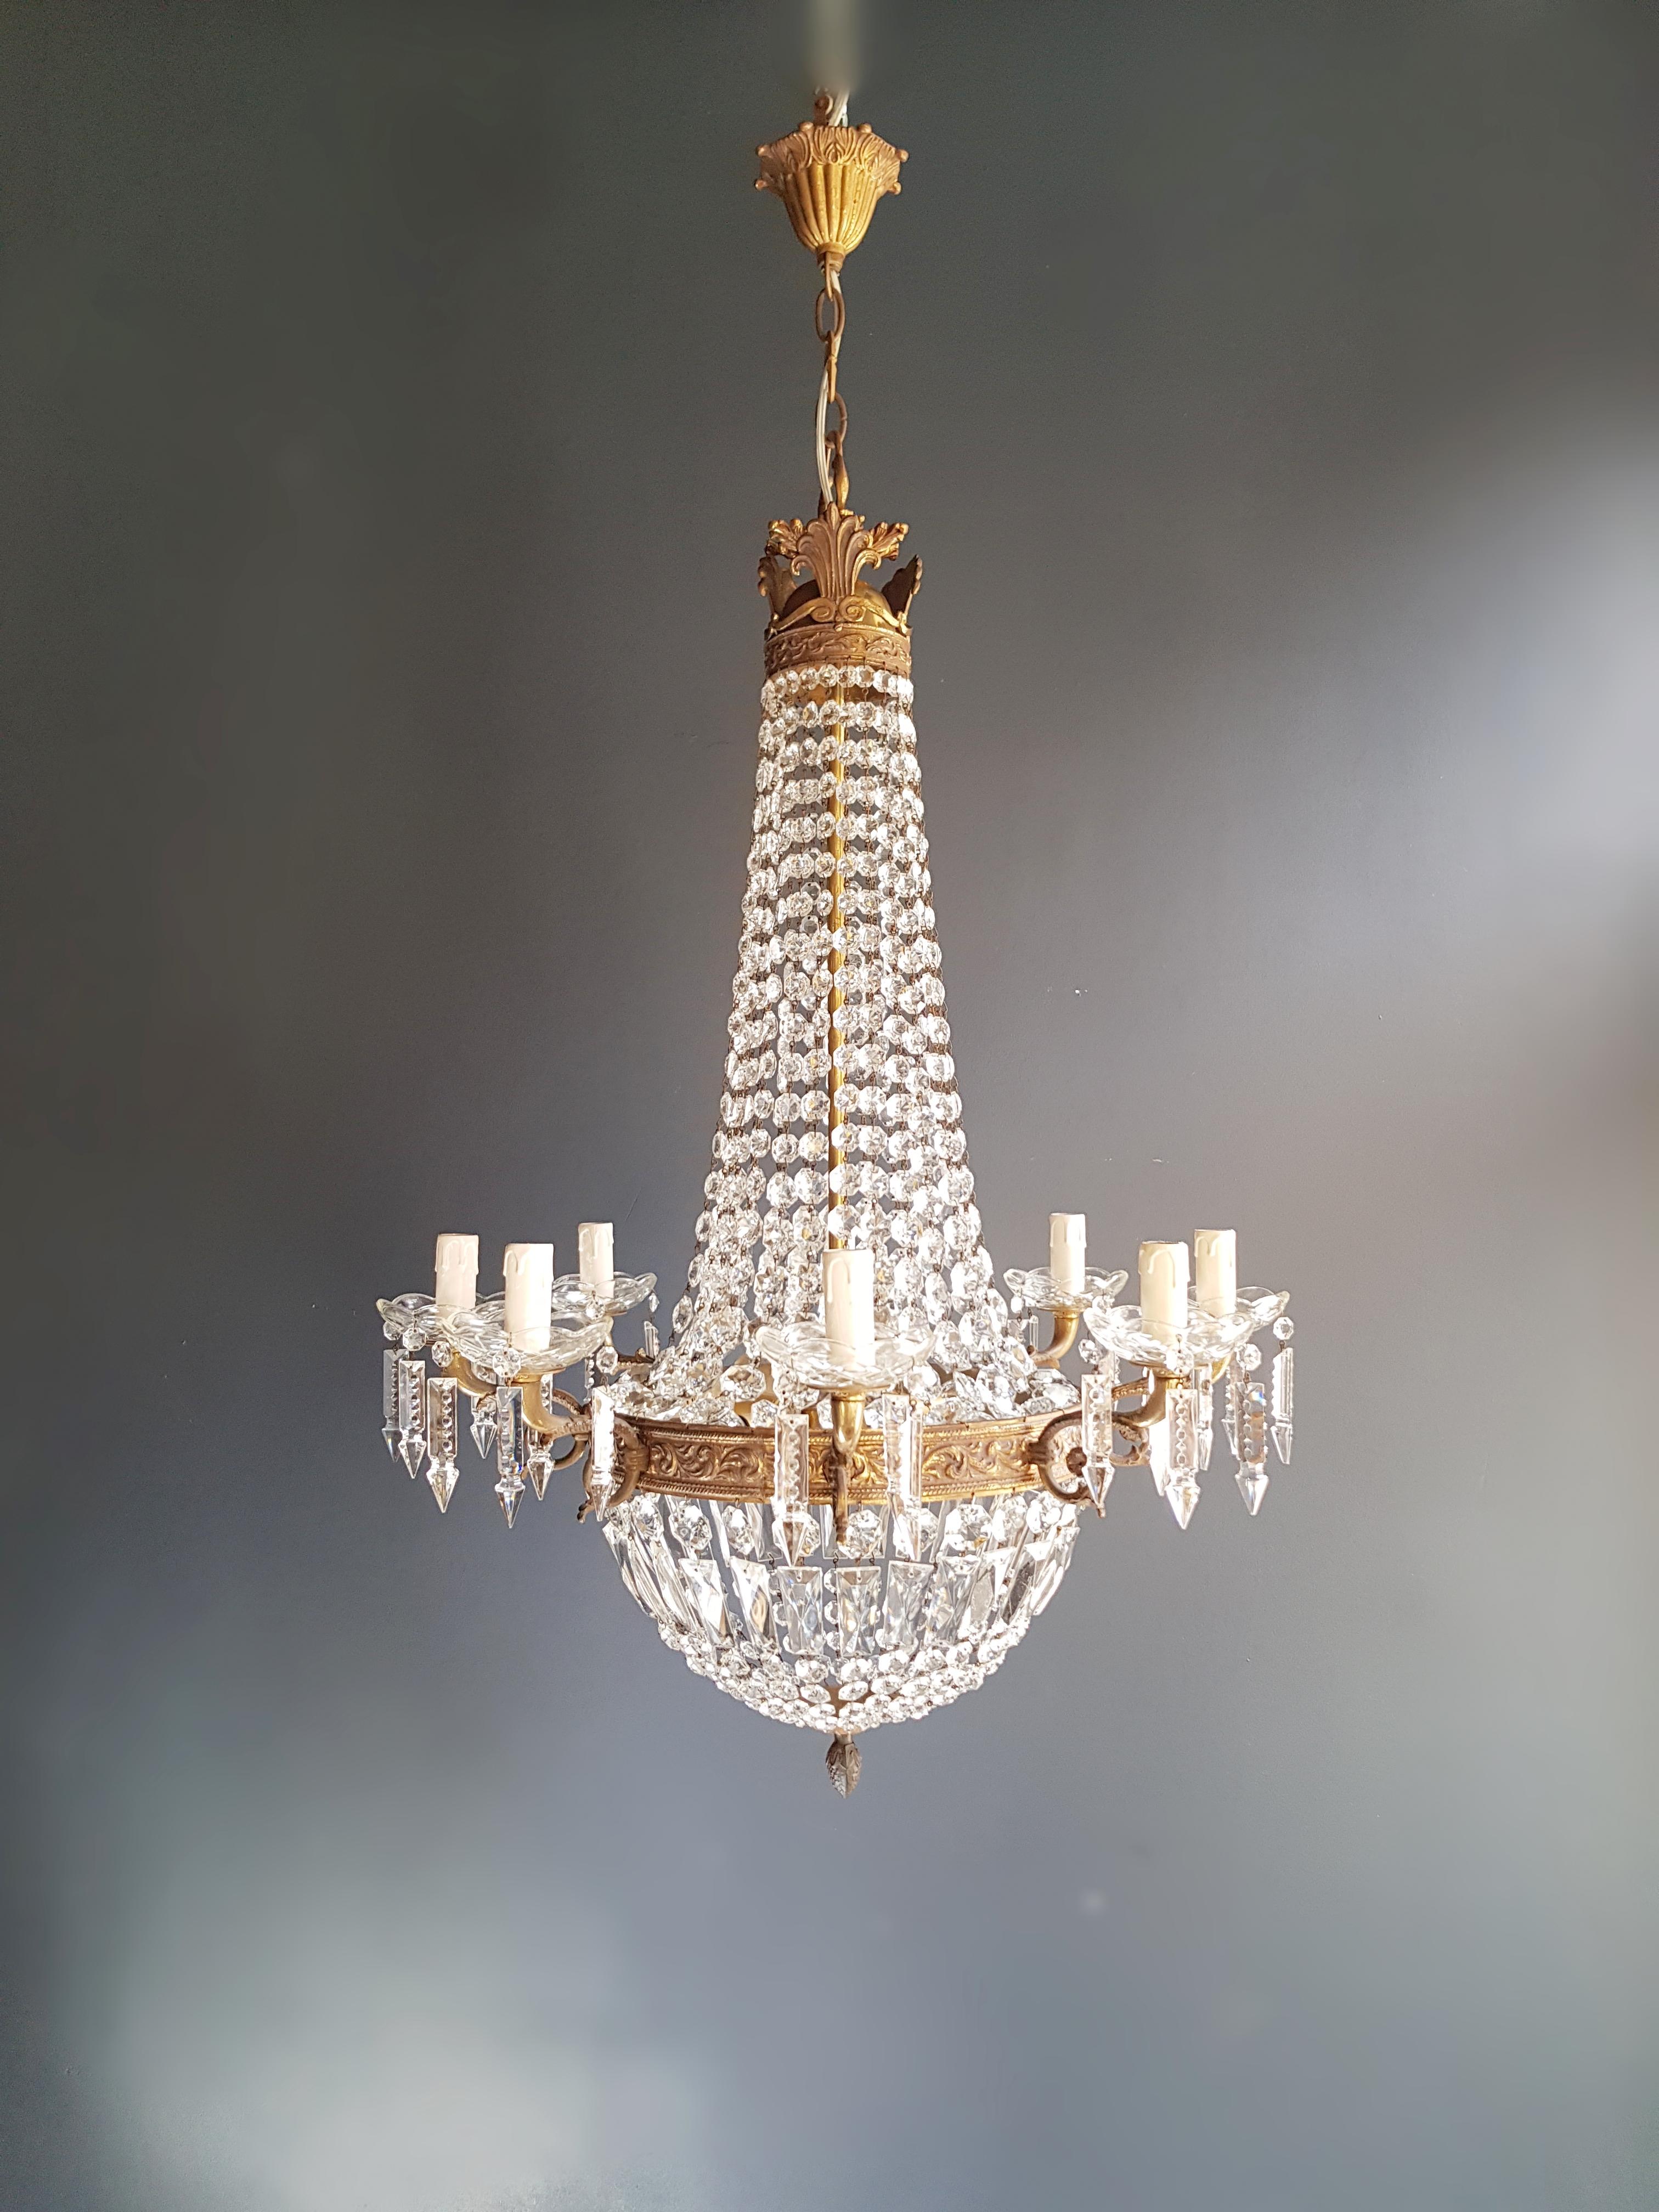 Cabling and sockets completely renewed. Crystal hand knotted
Measures: Total height 120 cm, height without chain: 90 cm, diameter 63 cm, weight (approximately) 10 kg.

Number of lights: 12-light bulb sockets: E14

Montgolfiè Empire sac a pearl